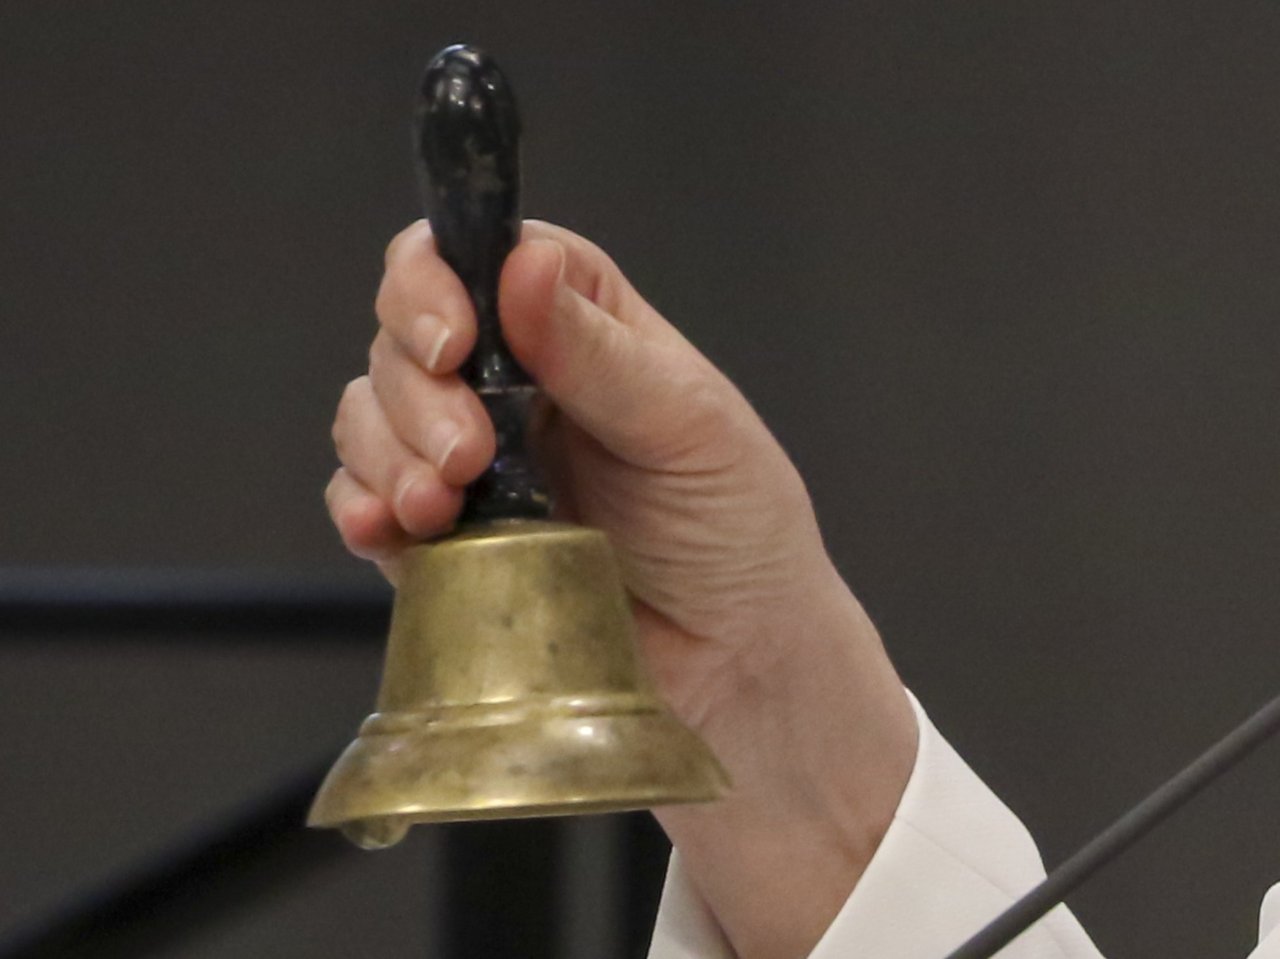 The President of the State Parliament uses a bell to bring the plenary session to order. 